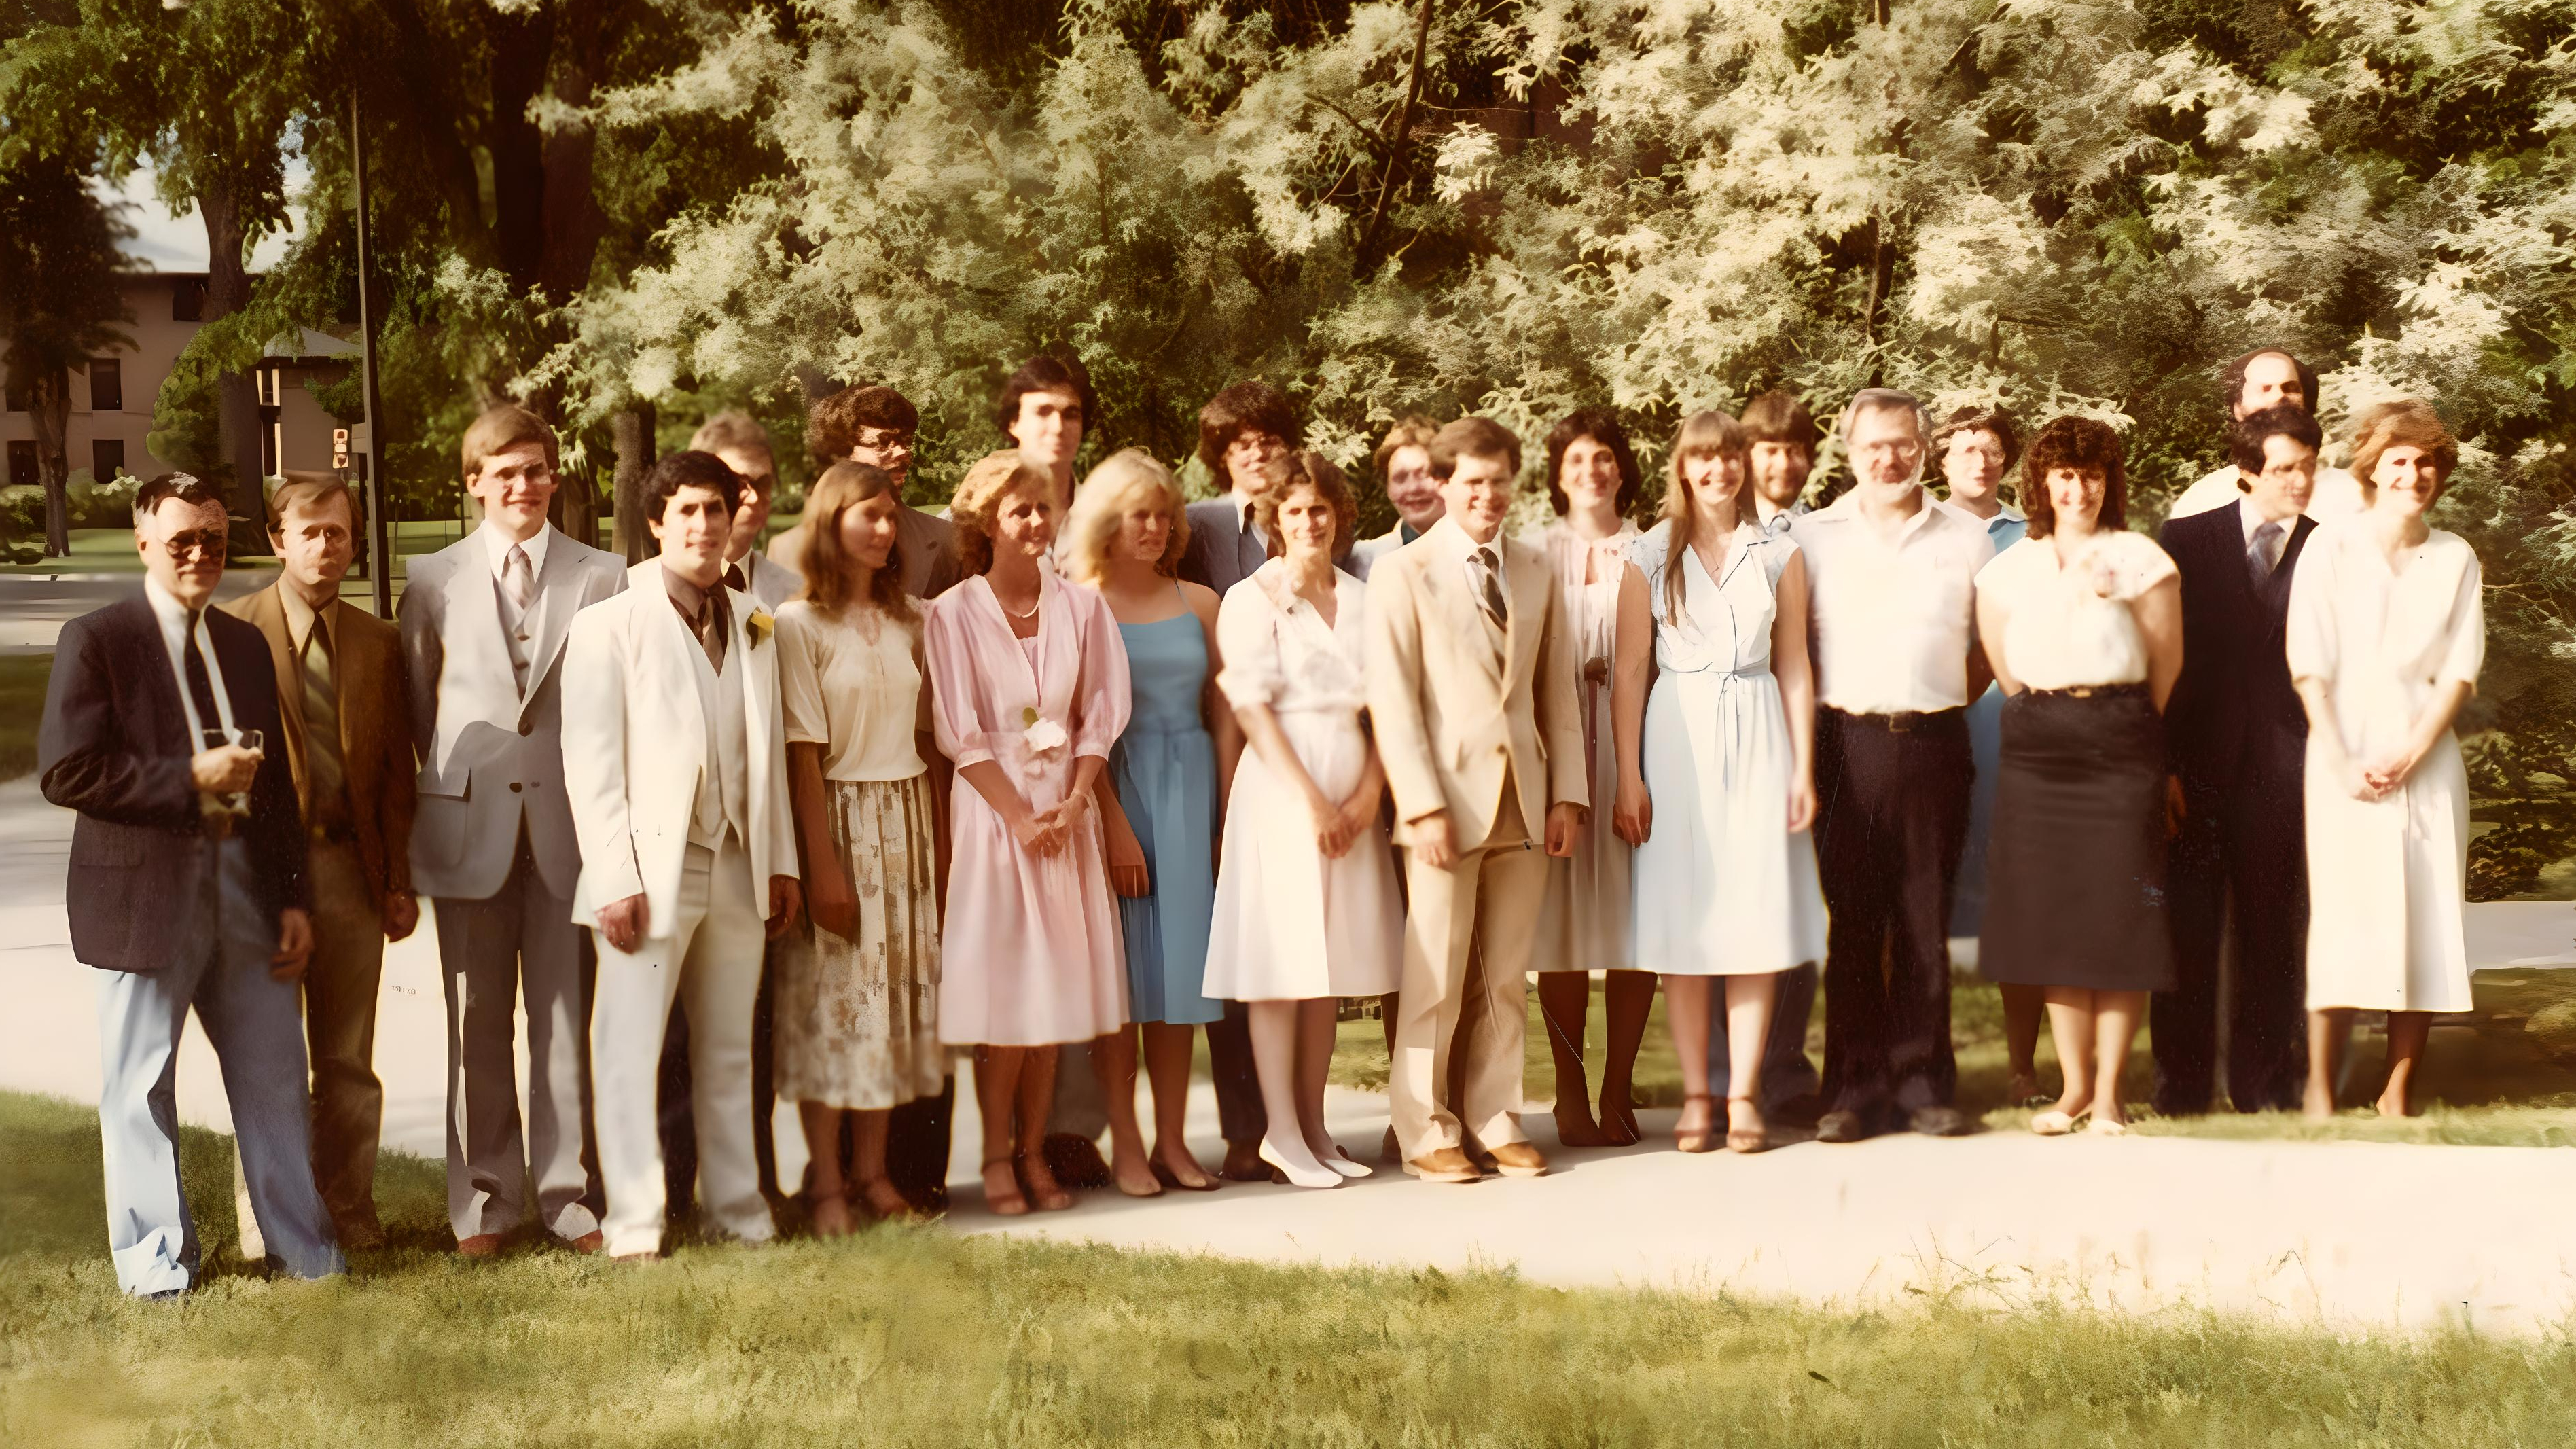 Biology majors class of 1983 with professors.  A group of nineteen people standing together in three rows on a grassy area, with trees in the background. Most are smiling and dressed in semi-formal attire.